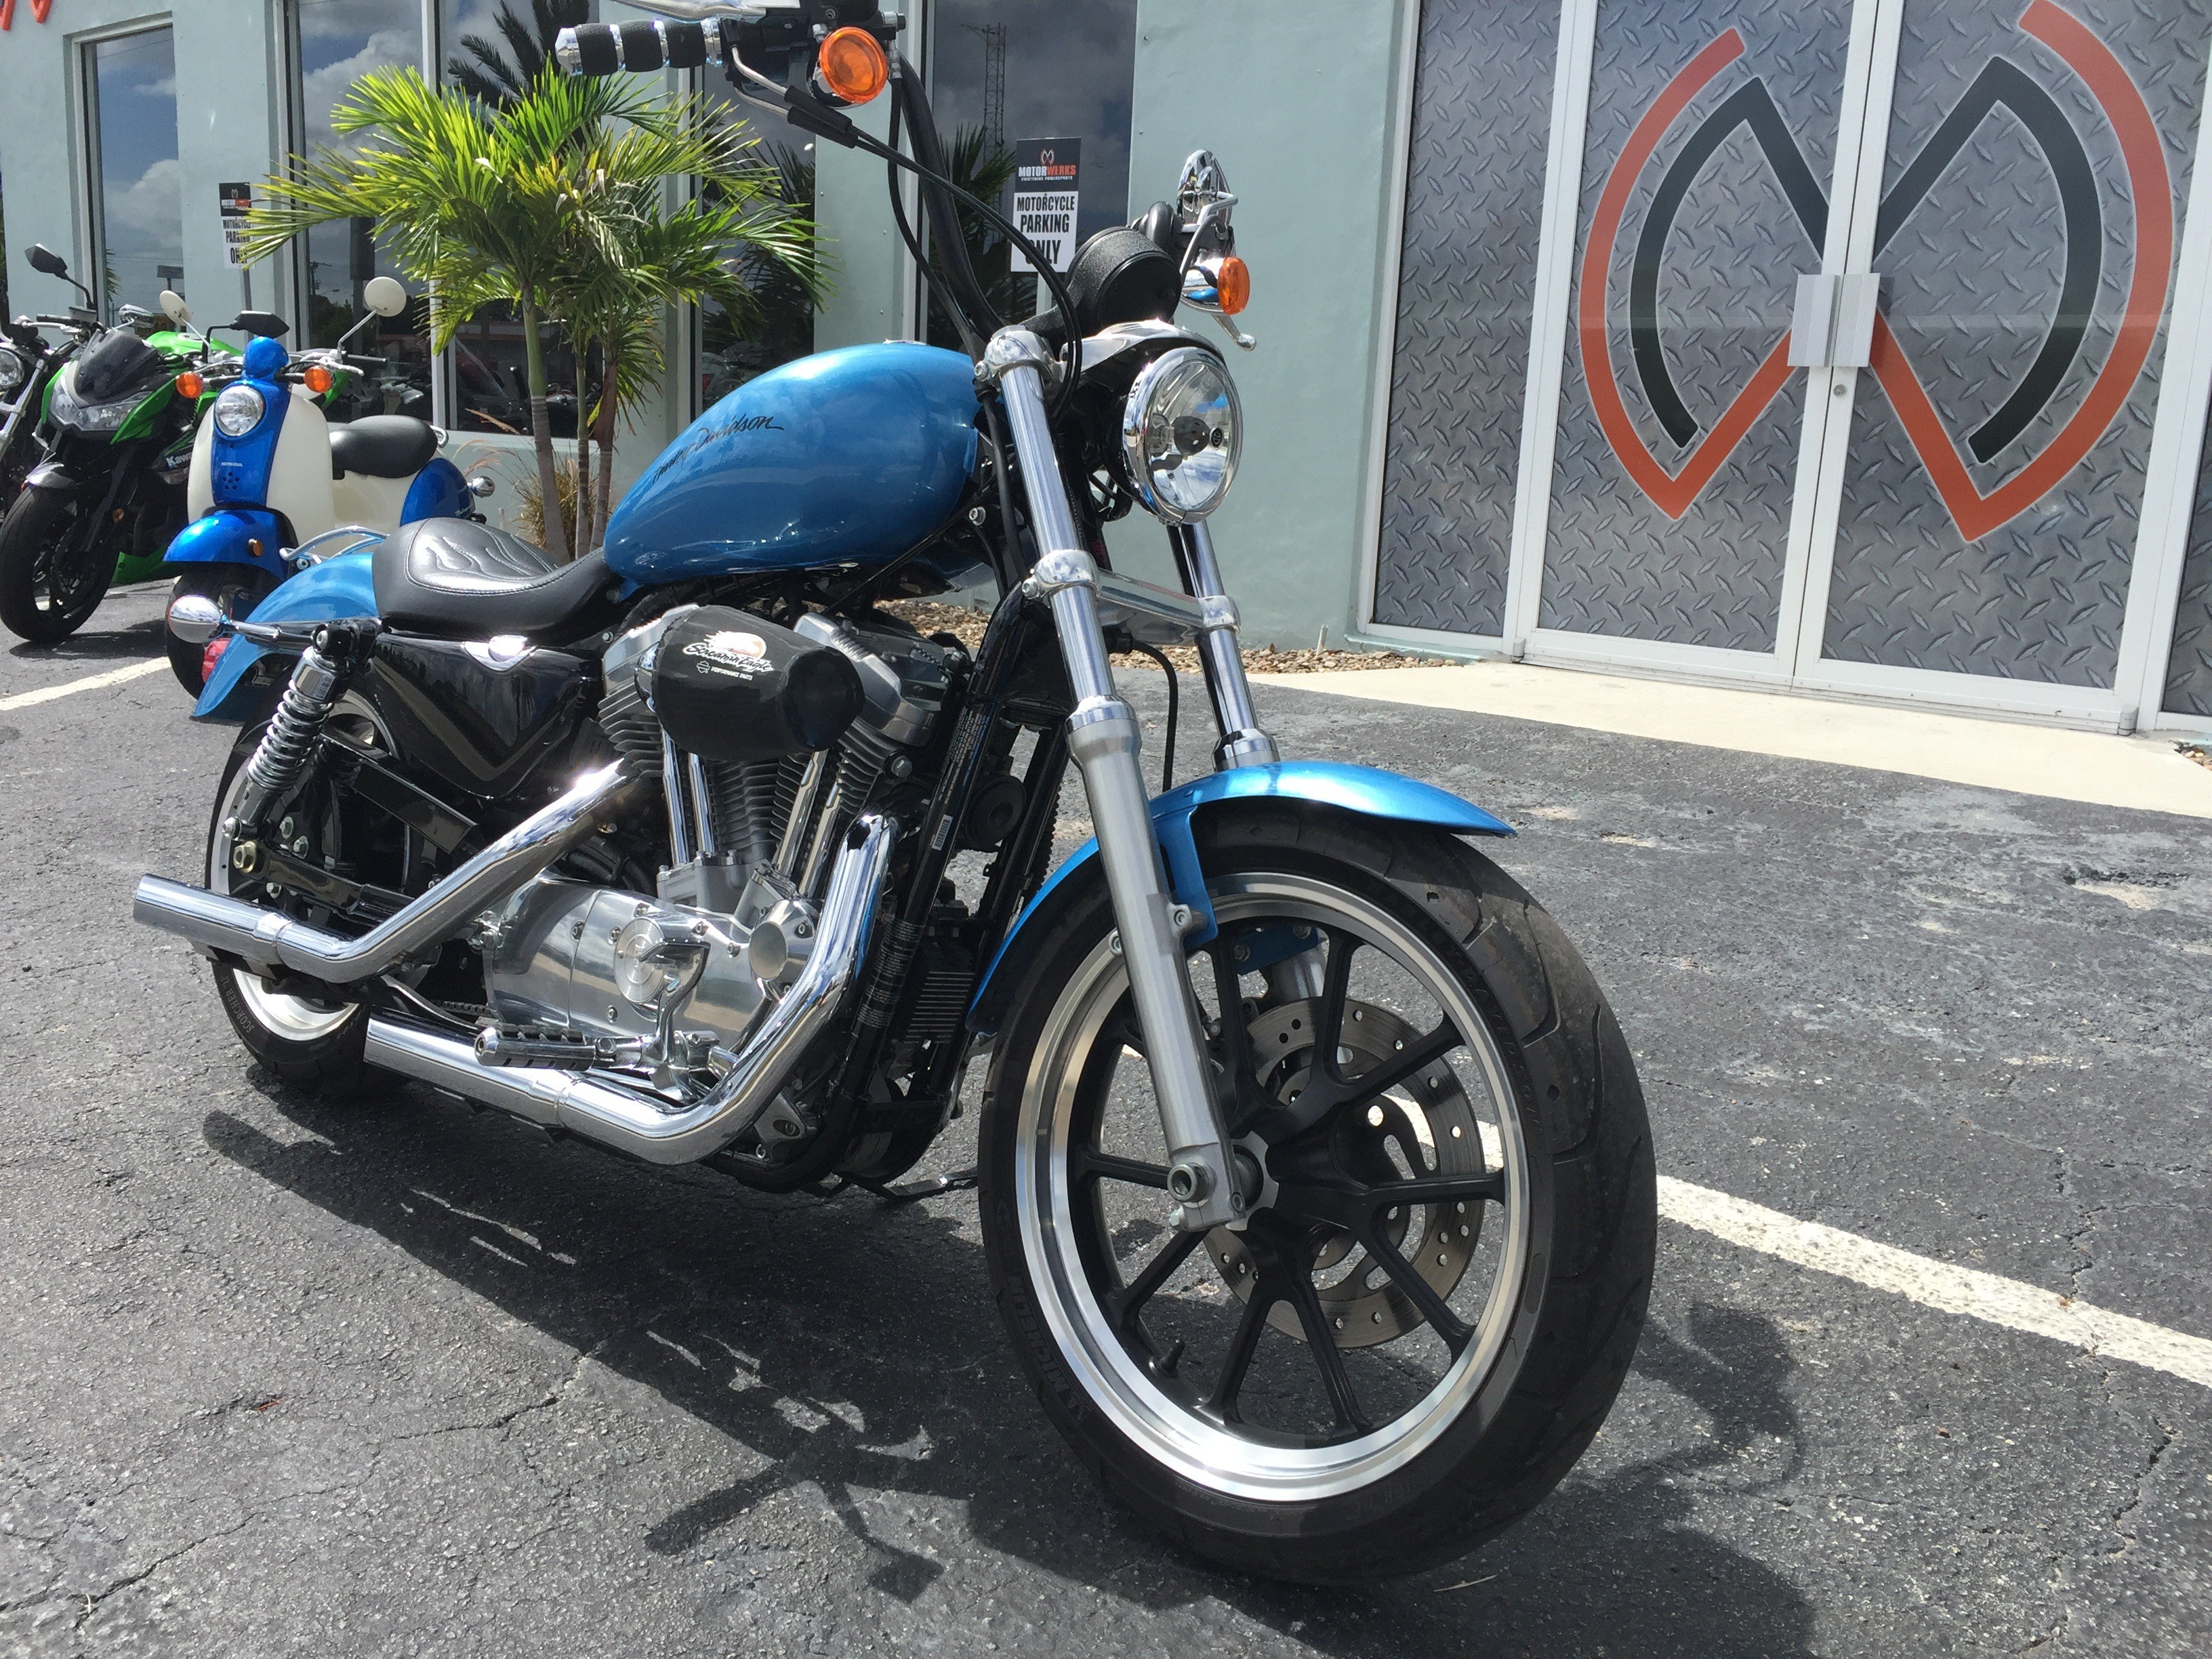 Used 2011 Harley-davidson Sportster 883 Superlow Motorcycles In Cocoa Fl Cool Blue Pearl Na